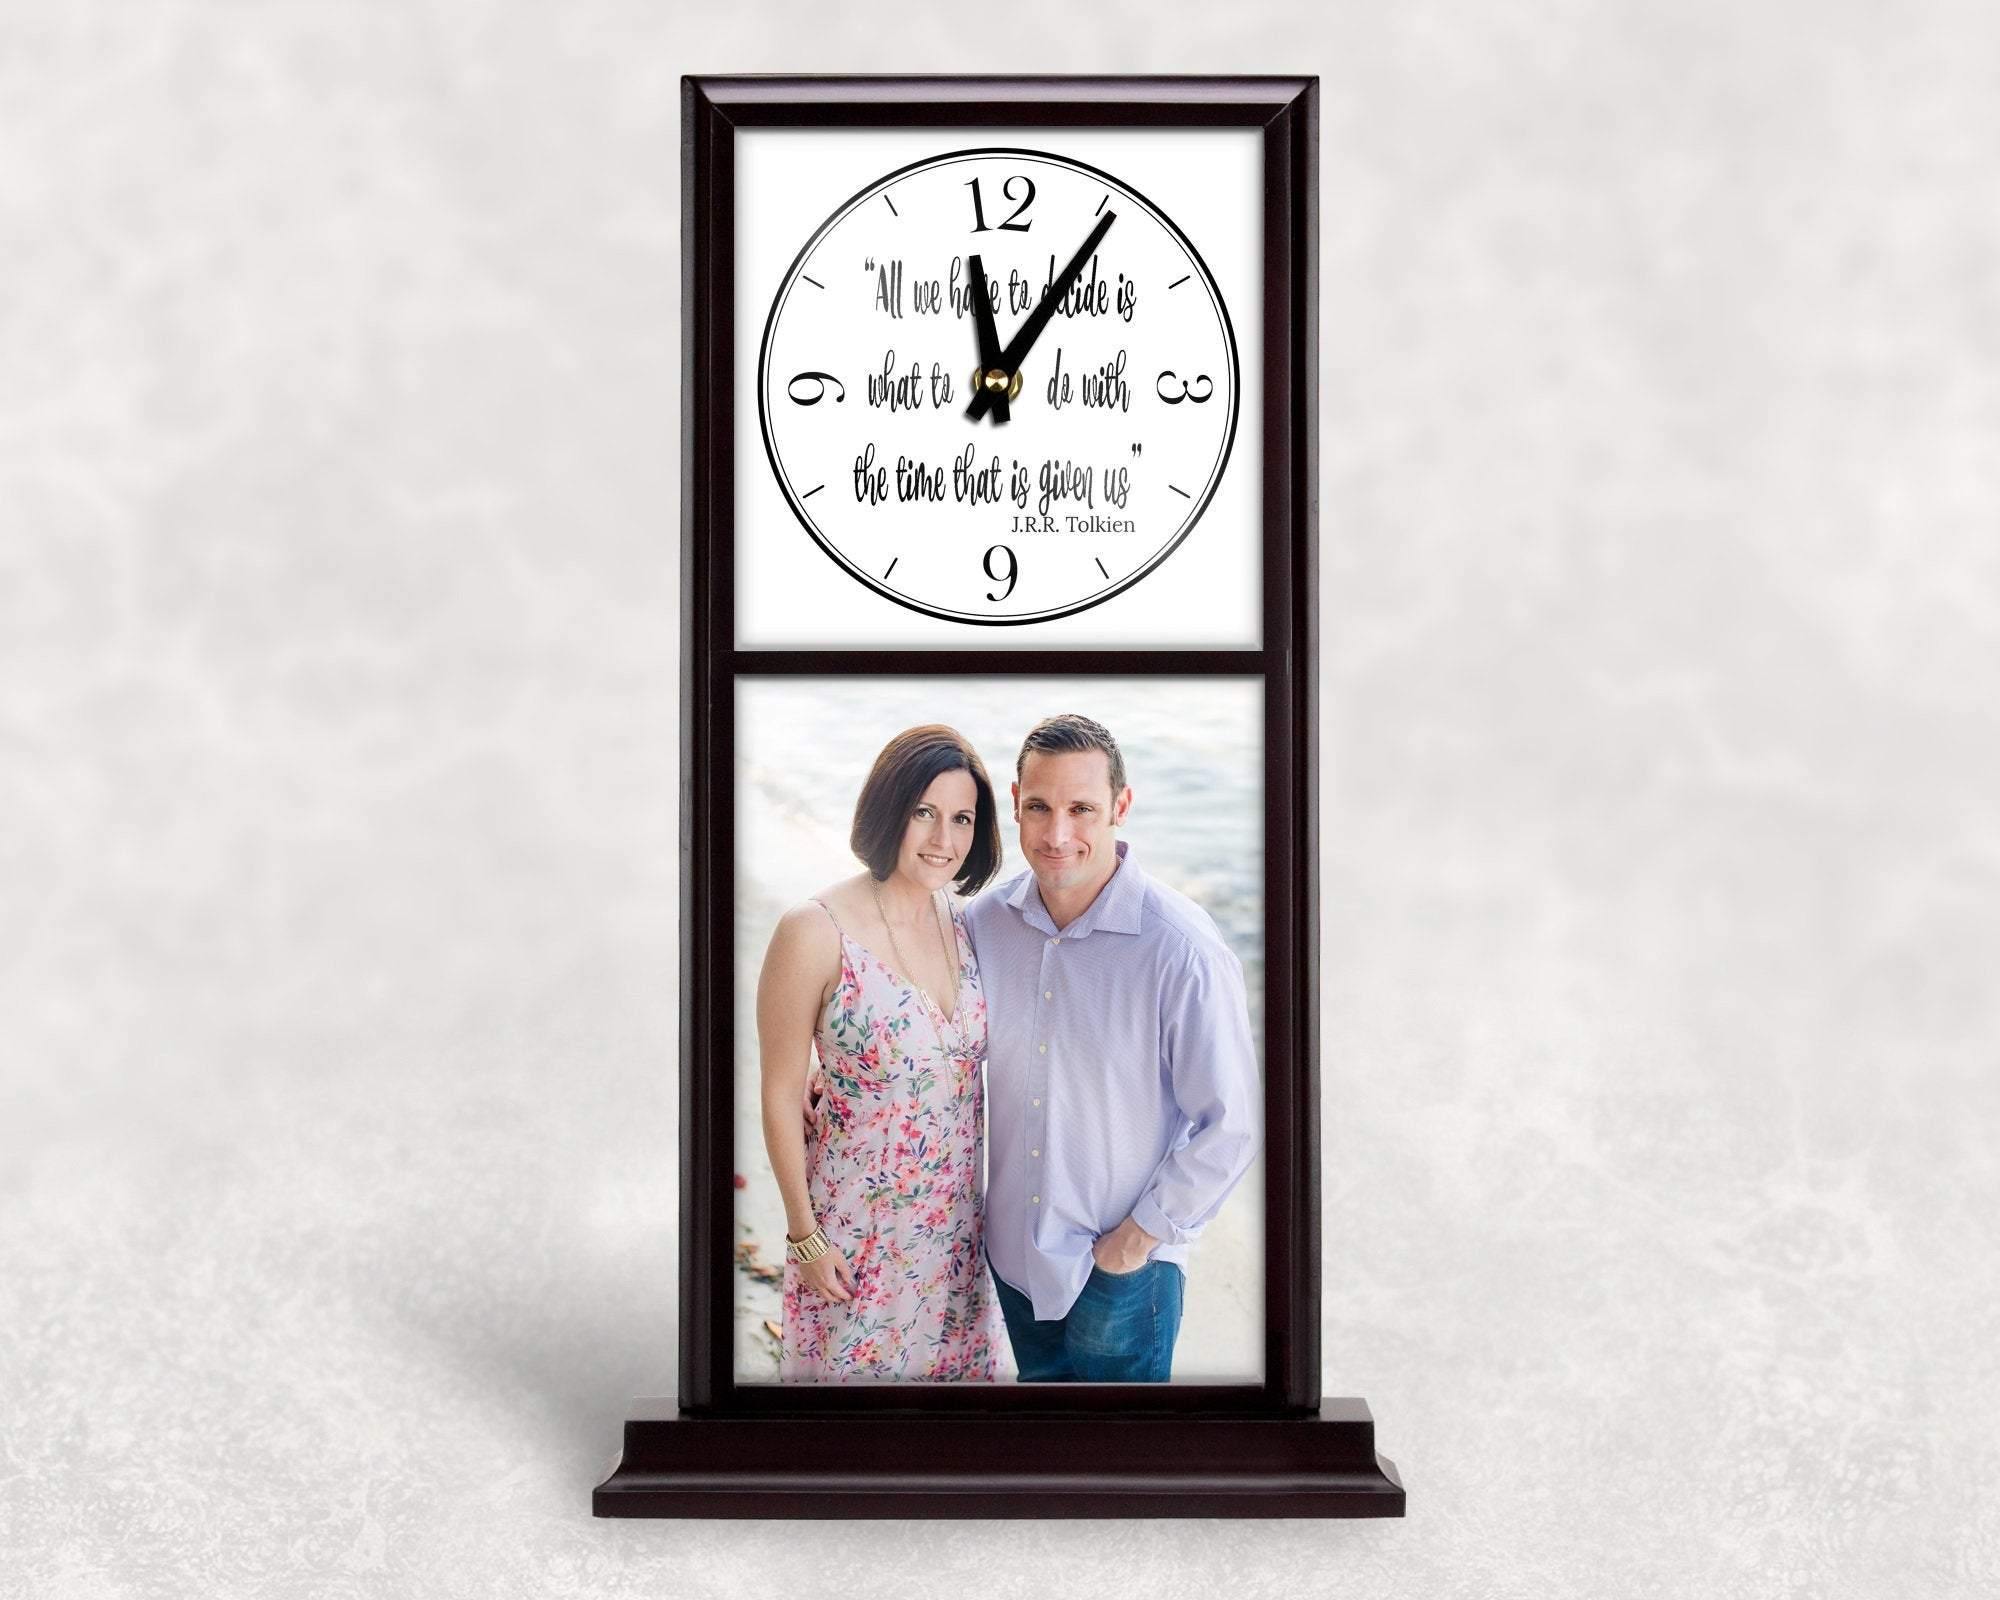 Personalized Mantle Clock | Custom Wall Decor | Decide Time - This & That Solutions - Personalized Mantle Clock | Custom Wall Decor | Decide Time - Personalized Gifts & Custom Home Decor